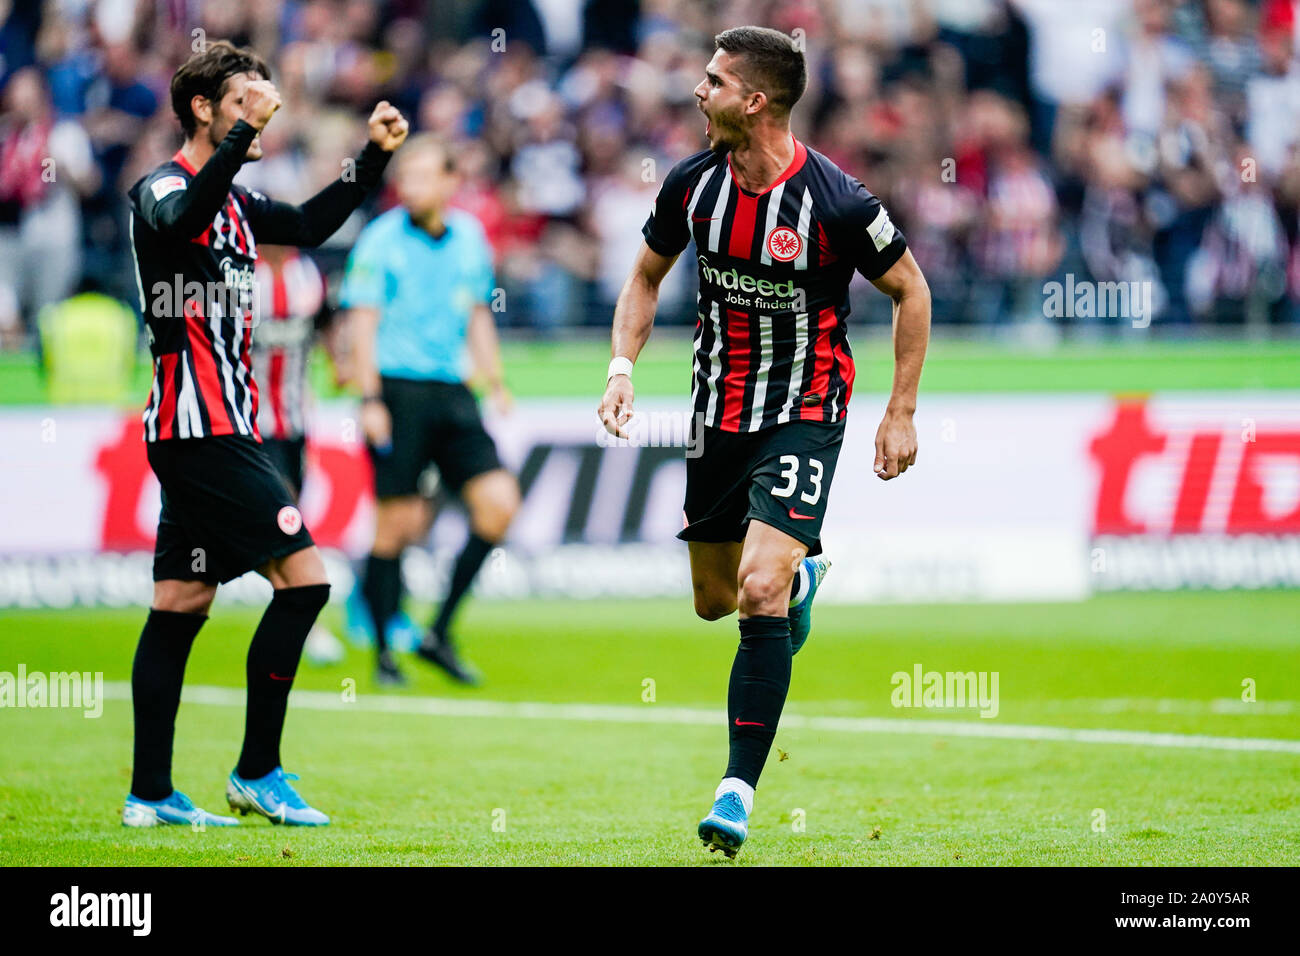 22 September 2019, Hessen, Frankfurt/Main: Soccer: Bundesliga, Eintracht Frankfurt - Borussia Dortmund, 5th matchday, in the Commerzbank Arena. Frankfurt's goal scorer Andre Silva (r) cheers over the goal to 1:1 alongside Goncalo Paciencia. Photo: Uwe Anspach/dpa - IMPORTANT NOTE: In accordance with the requirements of the DFL Deutsche Fußball Liga or the DFB Deutscher Fußball-Bund, it is prohibited to use or have used photographs taken in the stadium and/or the match in the form of sequence images and/or video-like photo sequences. Stock Photo